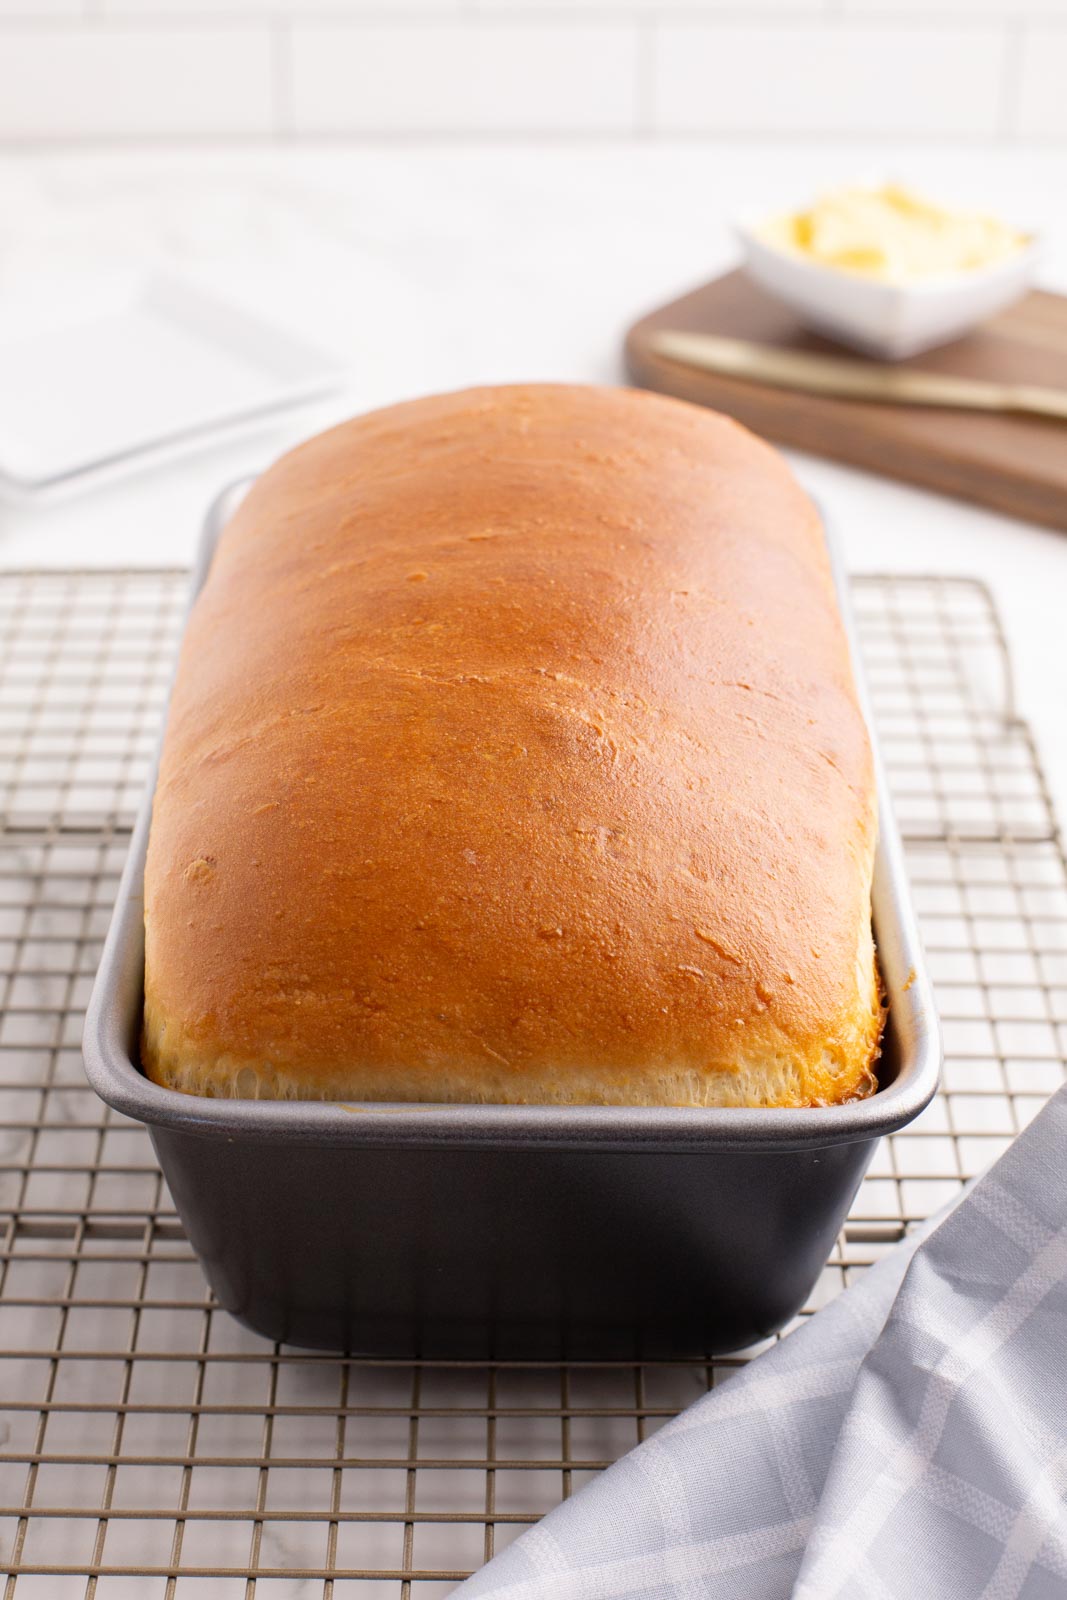 A loaf of mashed potato bread in a loaf pan.